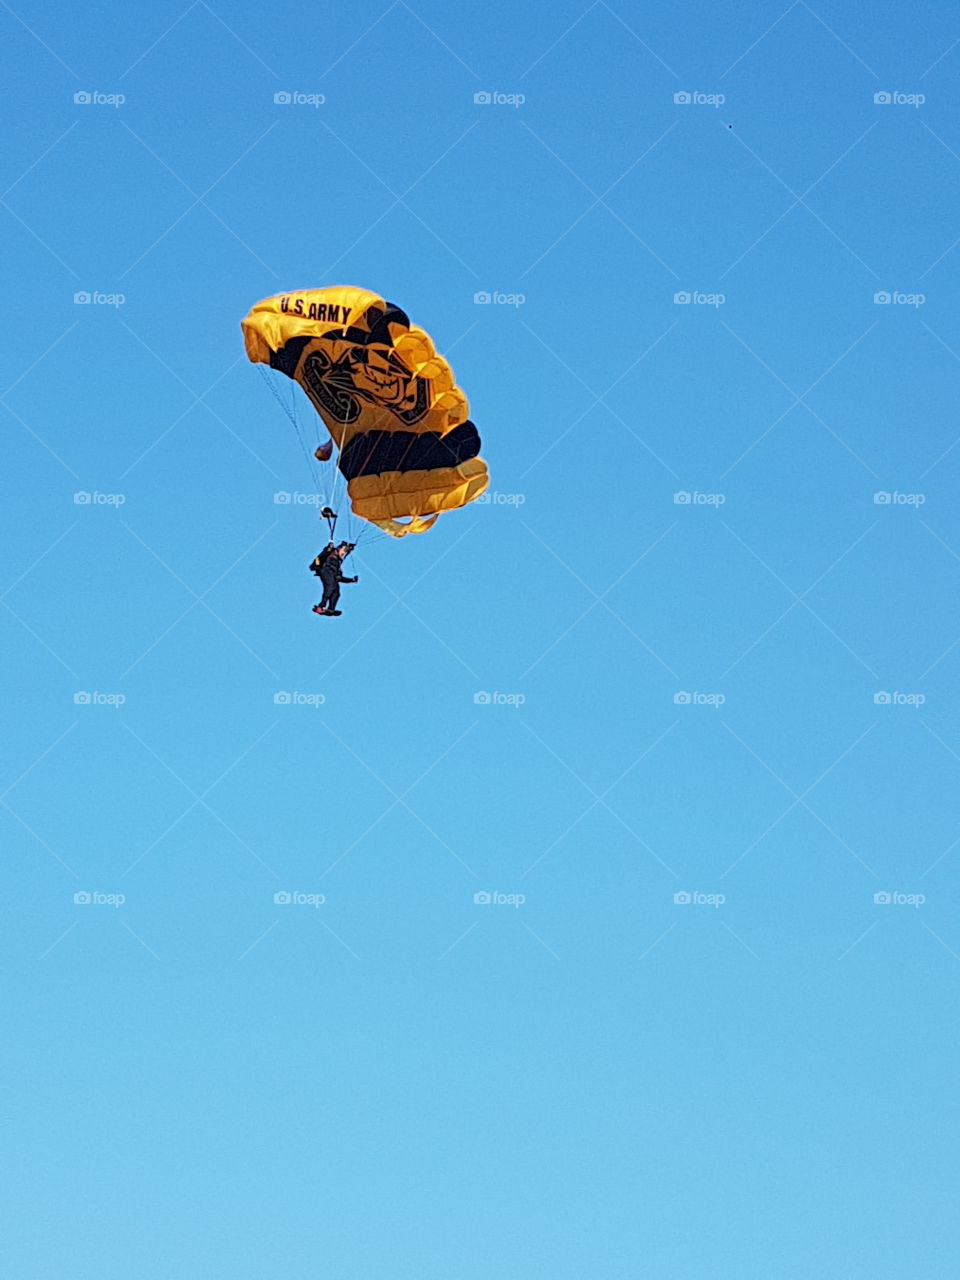 US Army Golden Knights parachuting in bright blue sky